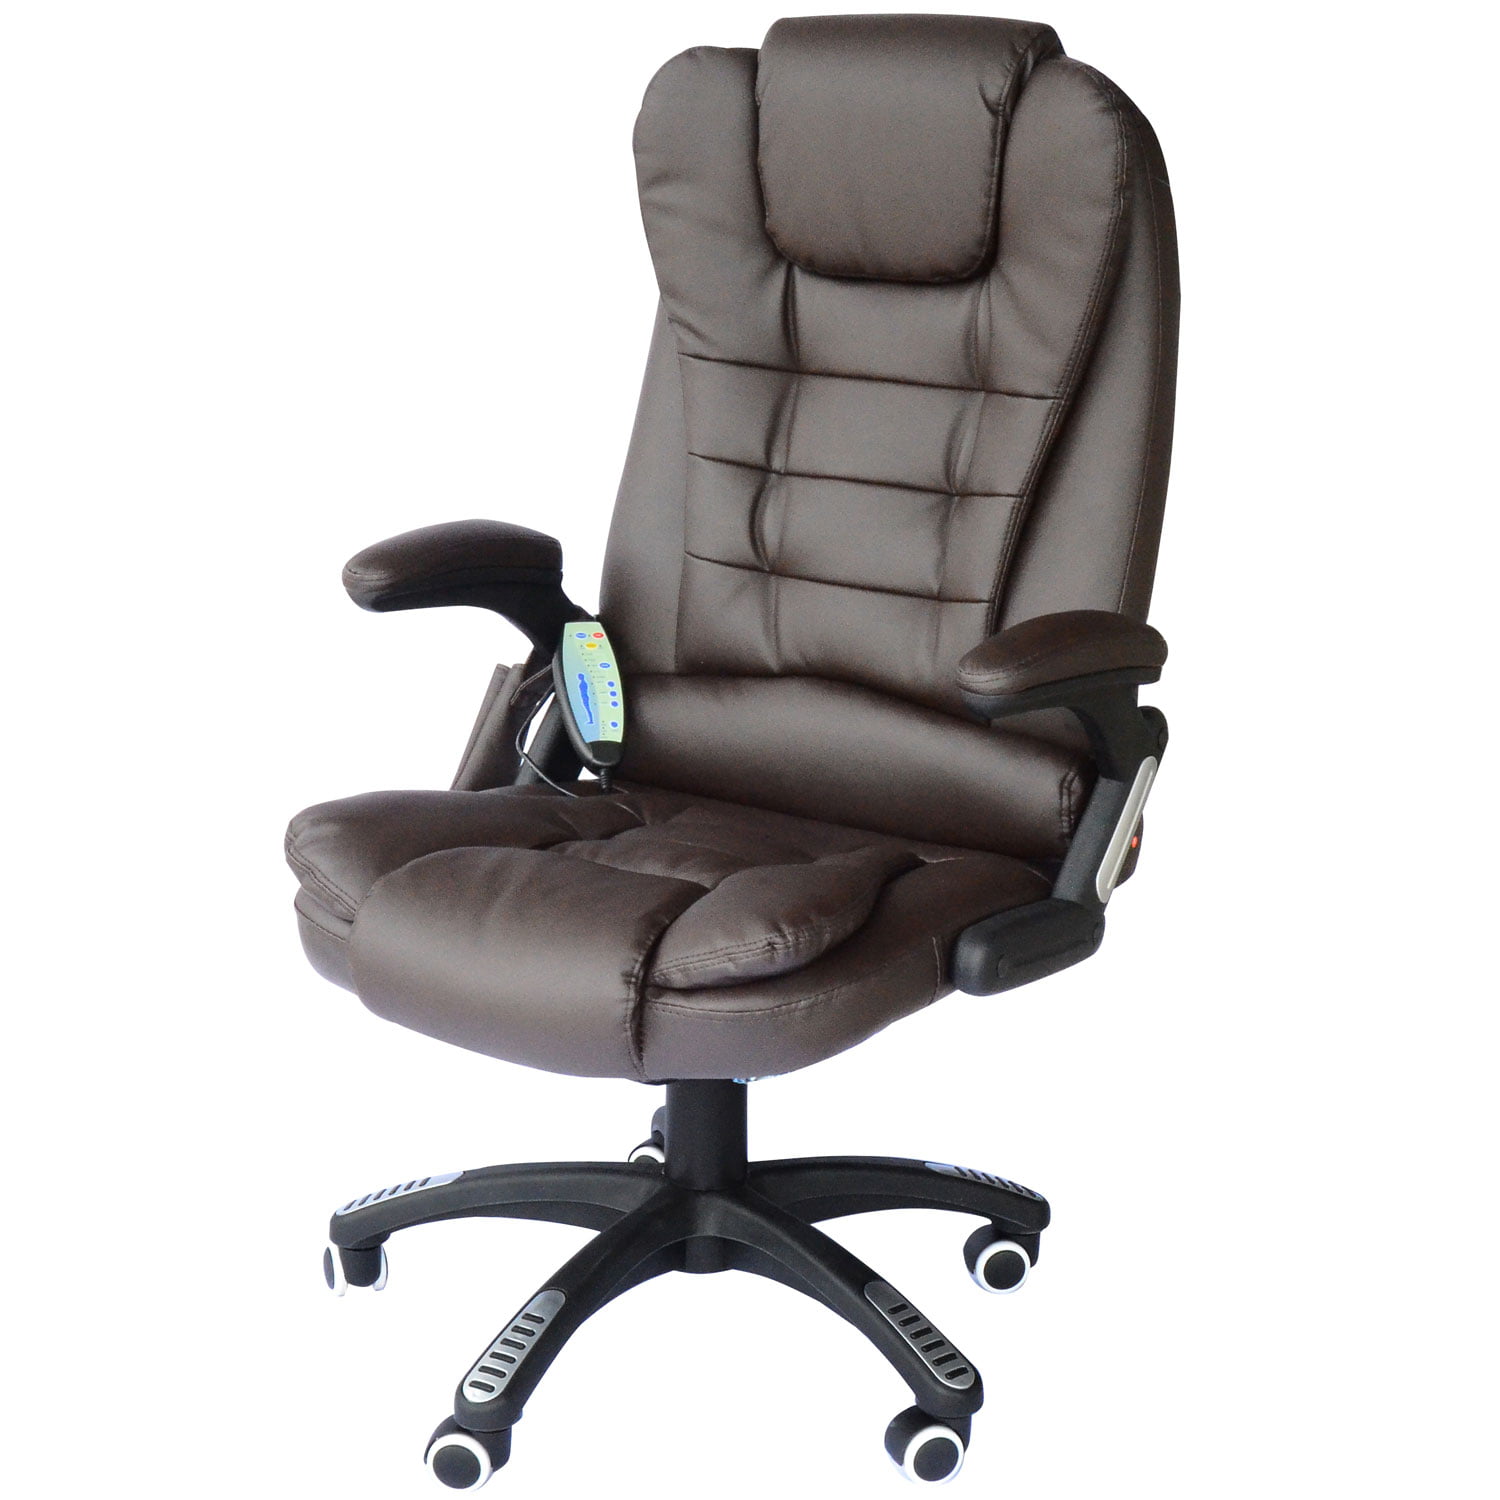 HomCom High Back Faux Leather Adjustable Heated Executive Massage Office Chair - Dark Brown